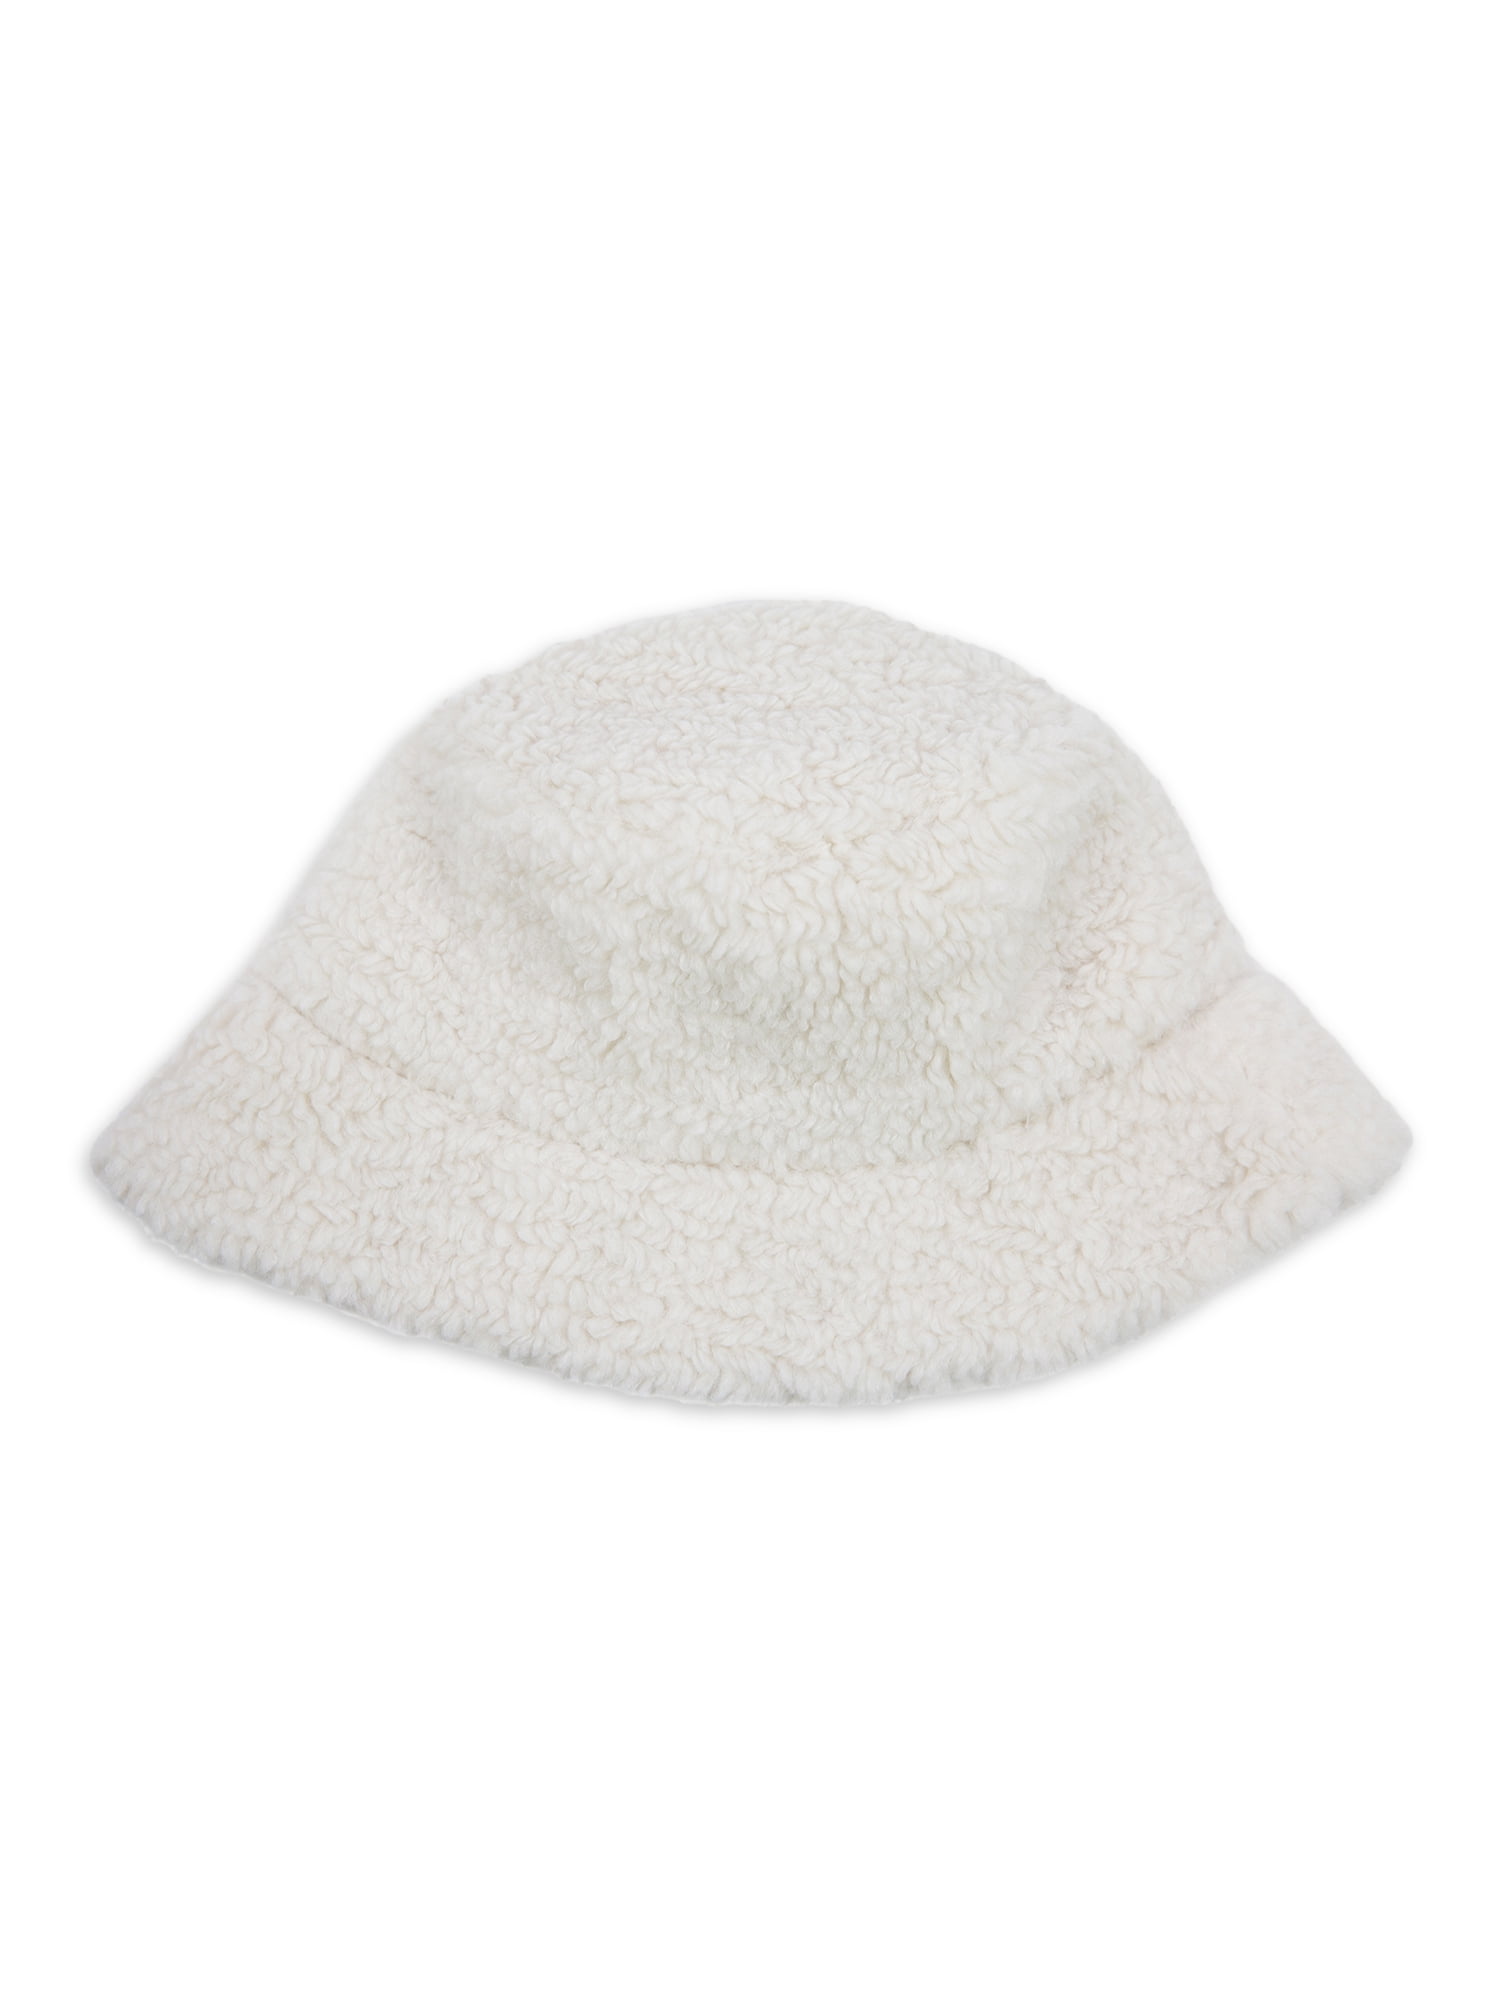 Time and Tru Bucket Cream Hat Size Teddy Sherpa Color One